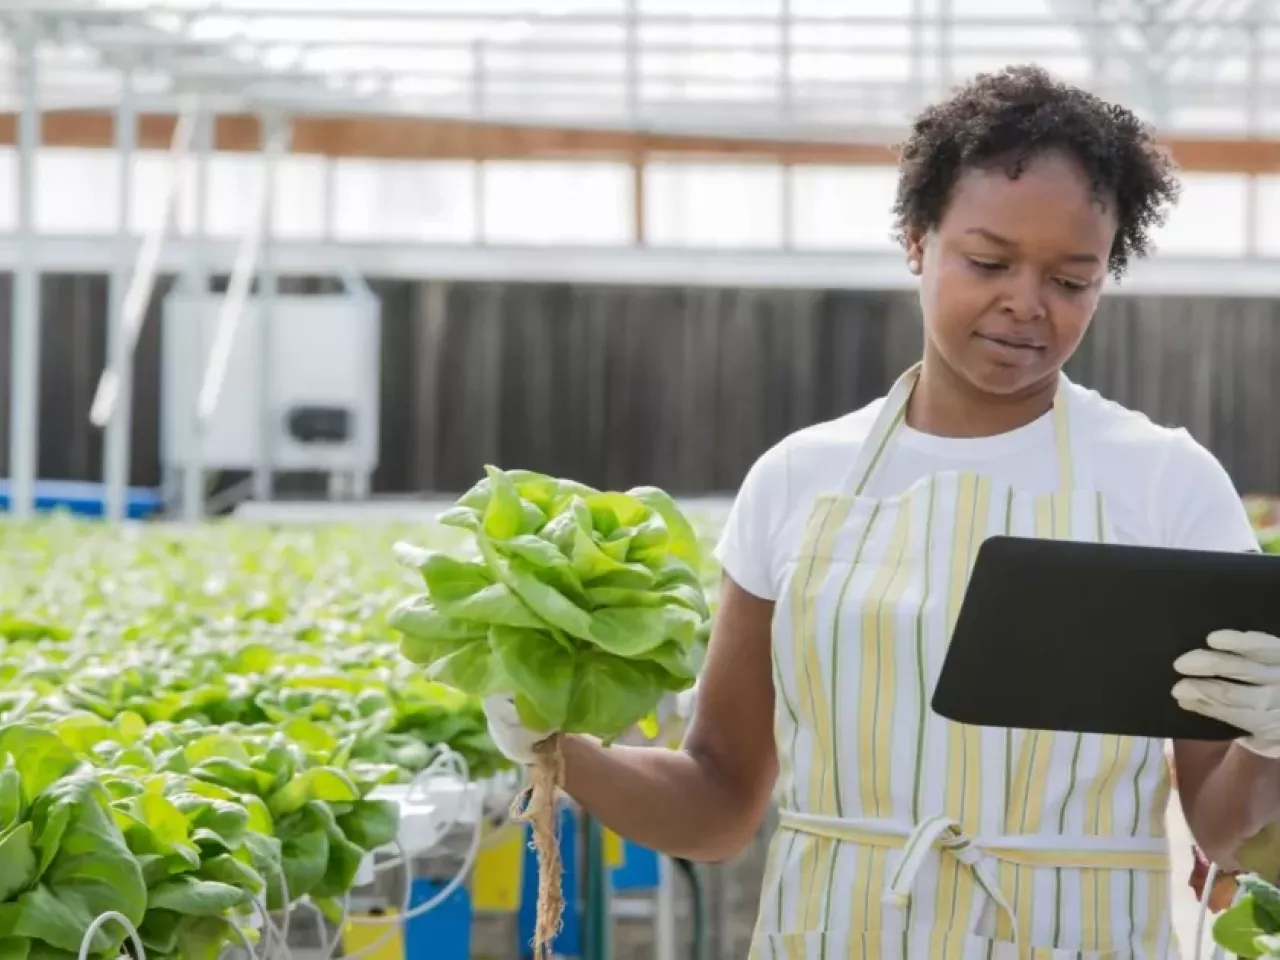 A person looking at a tablet while holding lettuce in a greenhouse